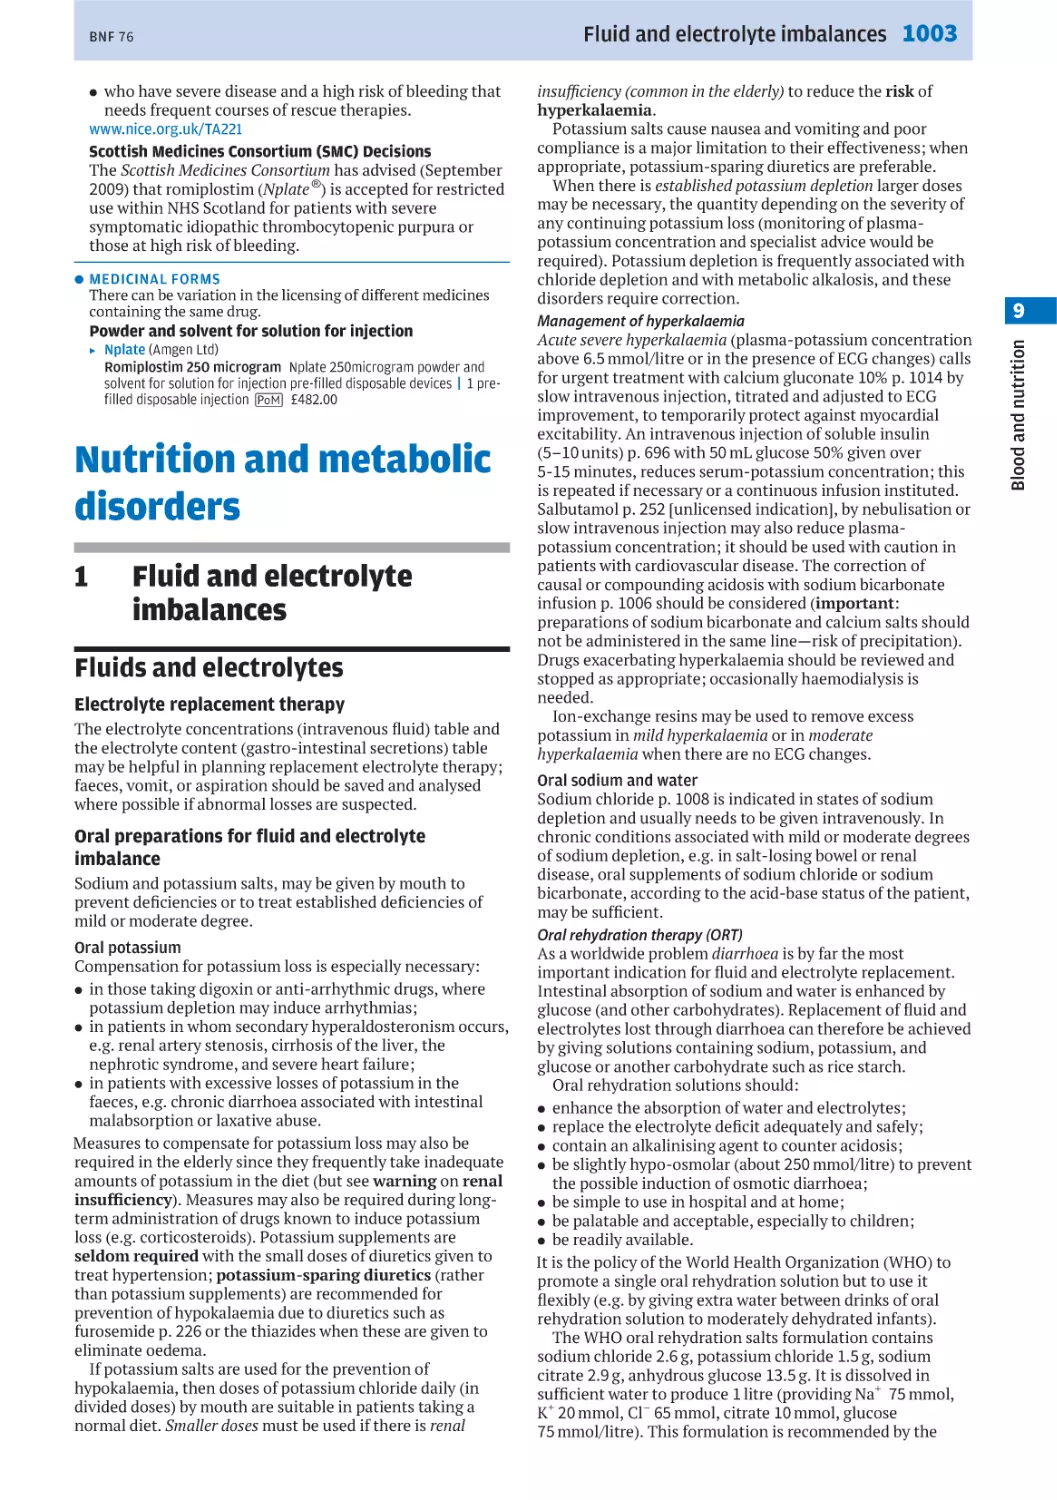 Nutrition and metabolic disorders
Fluid and electrolyte imbalances